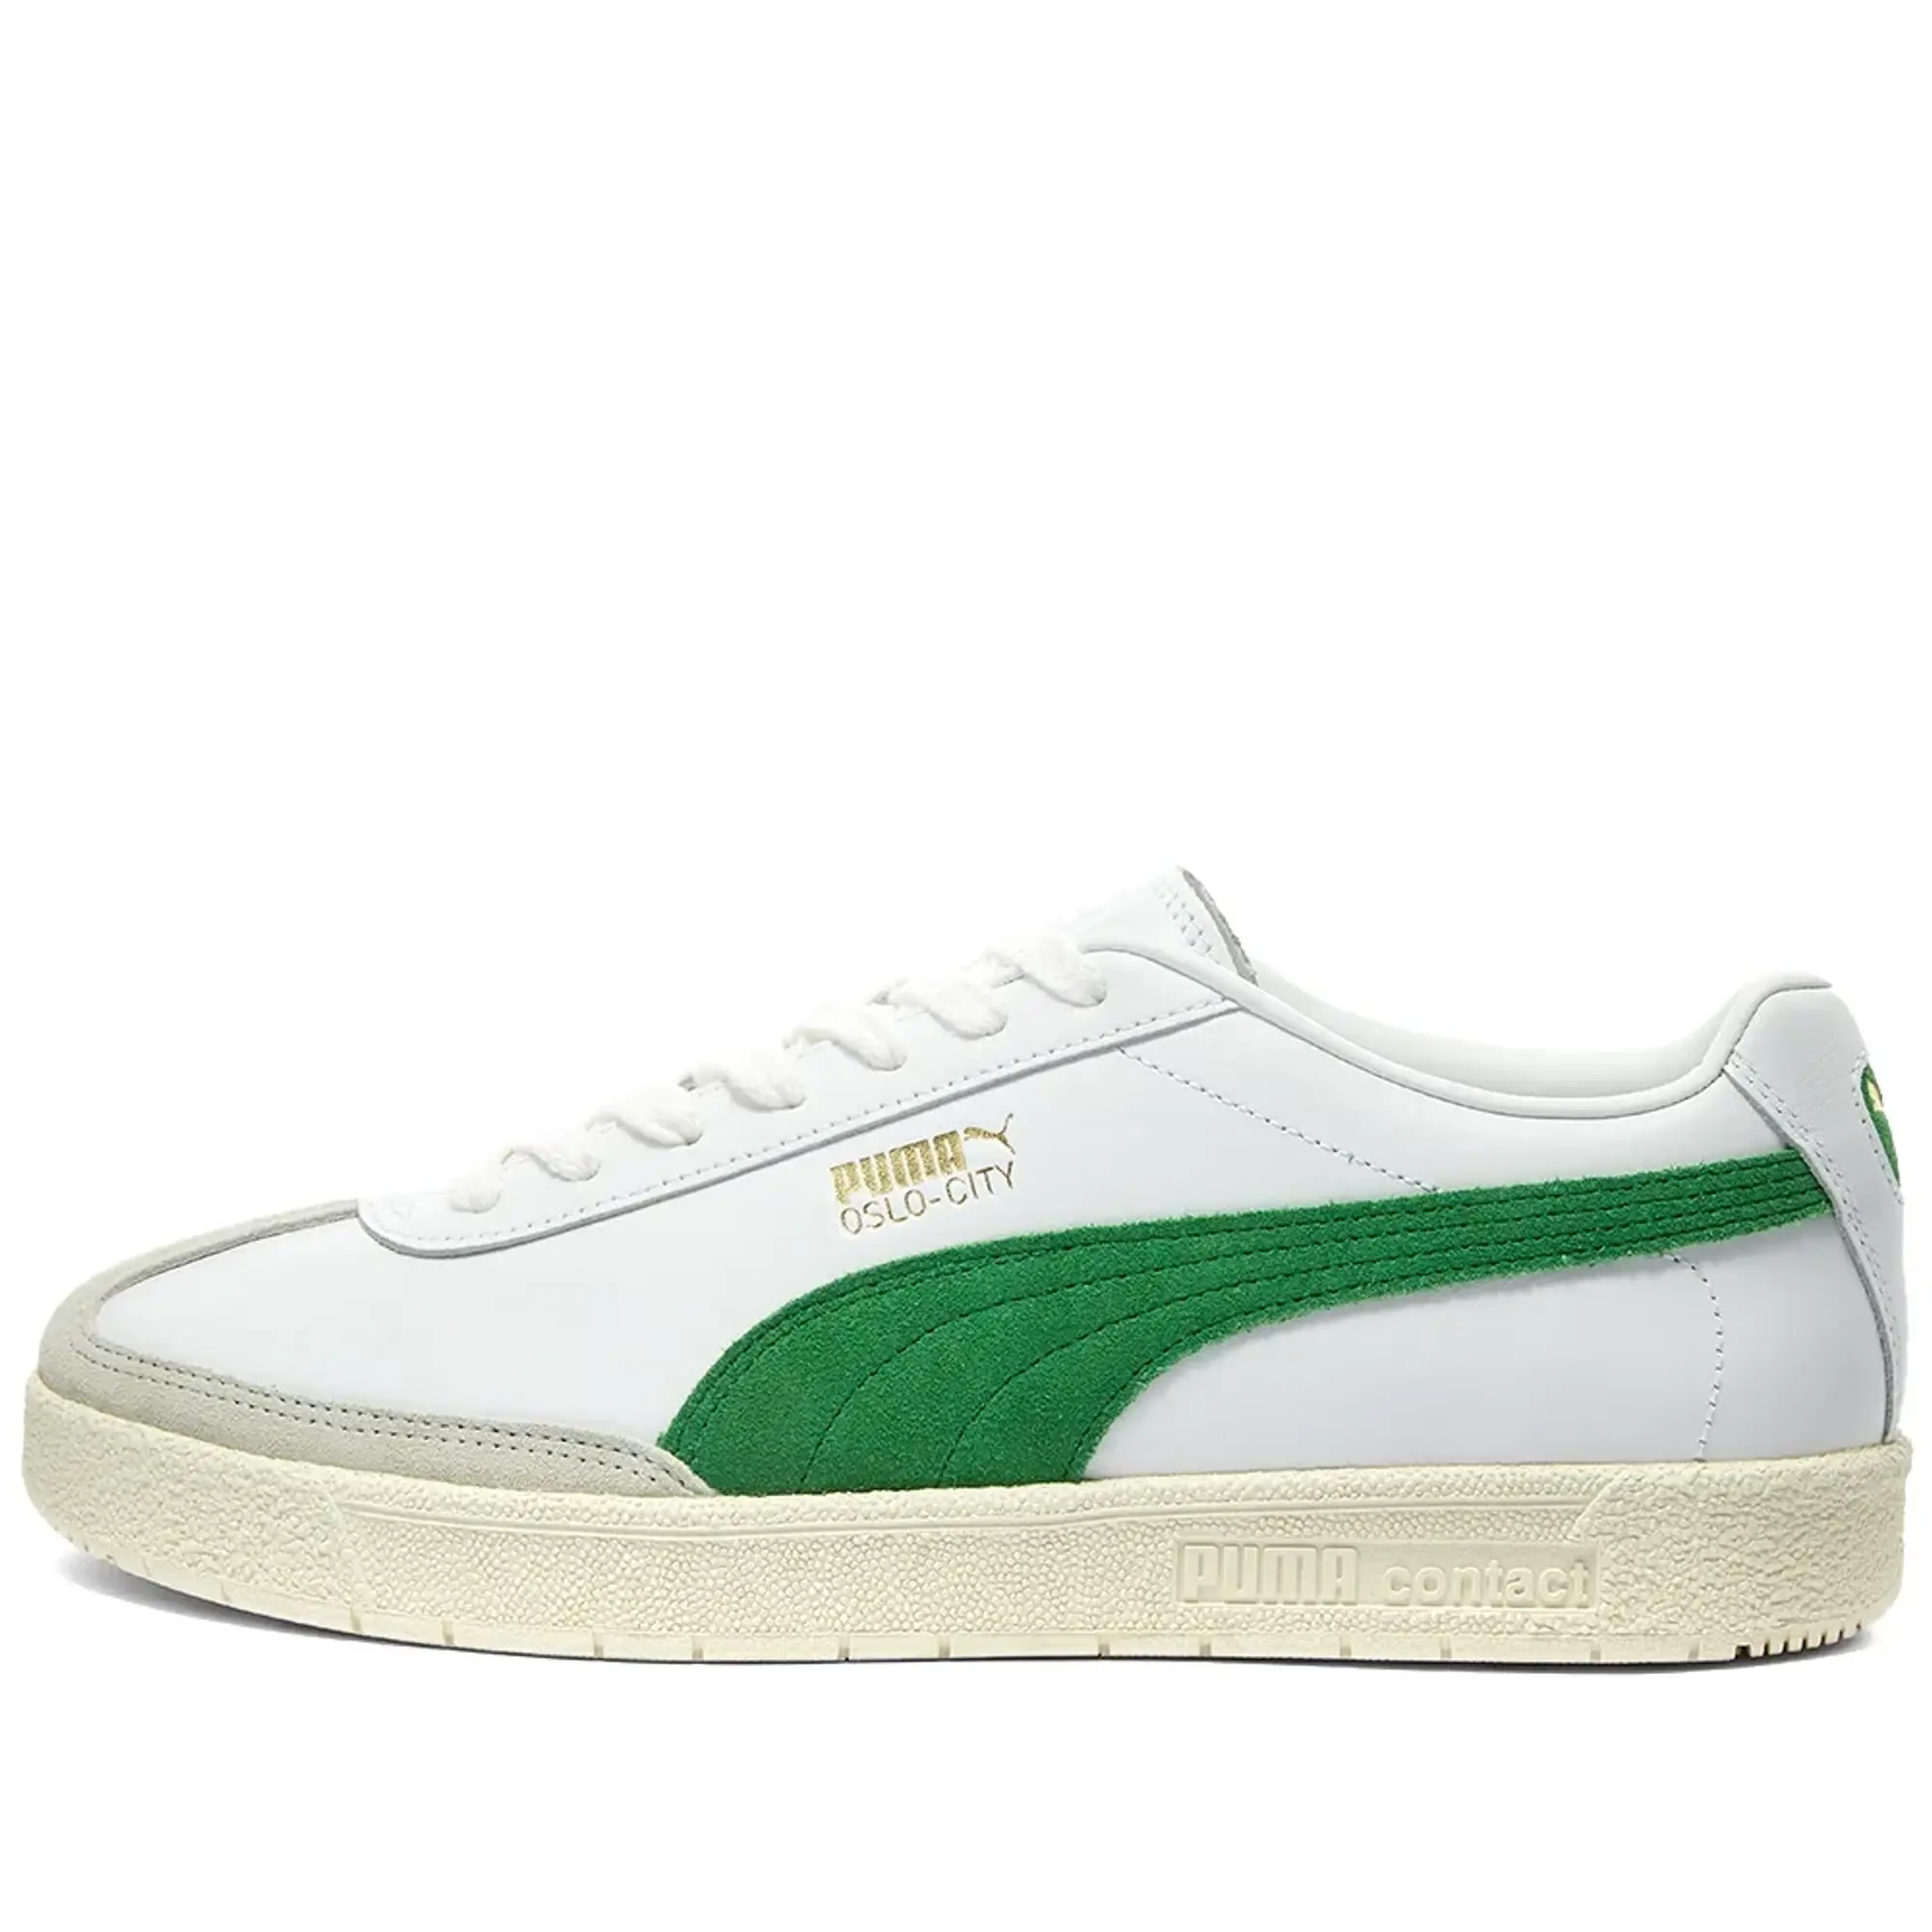 Puma Olso City Trainers In White And Green